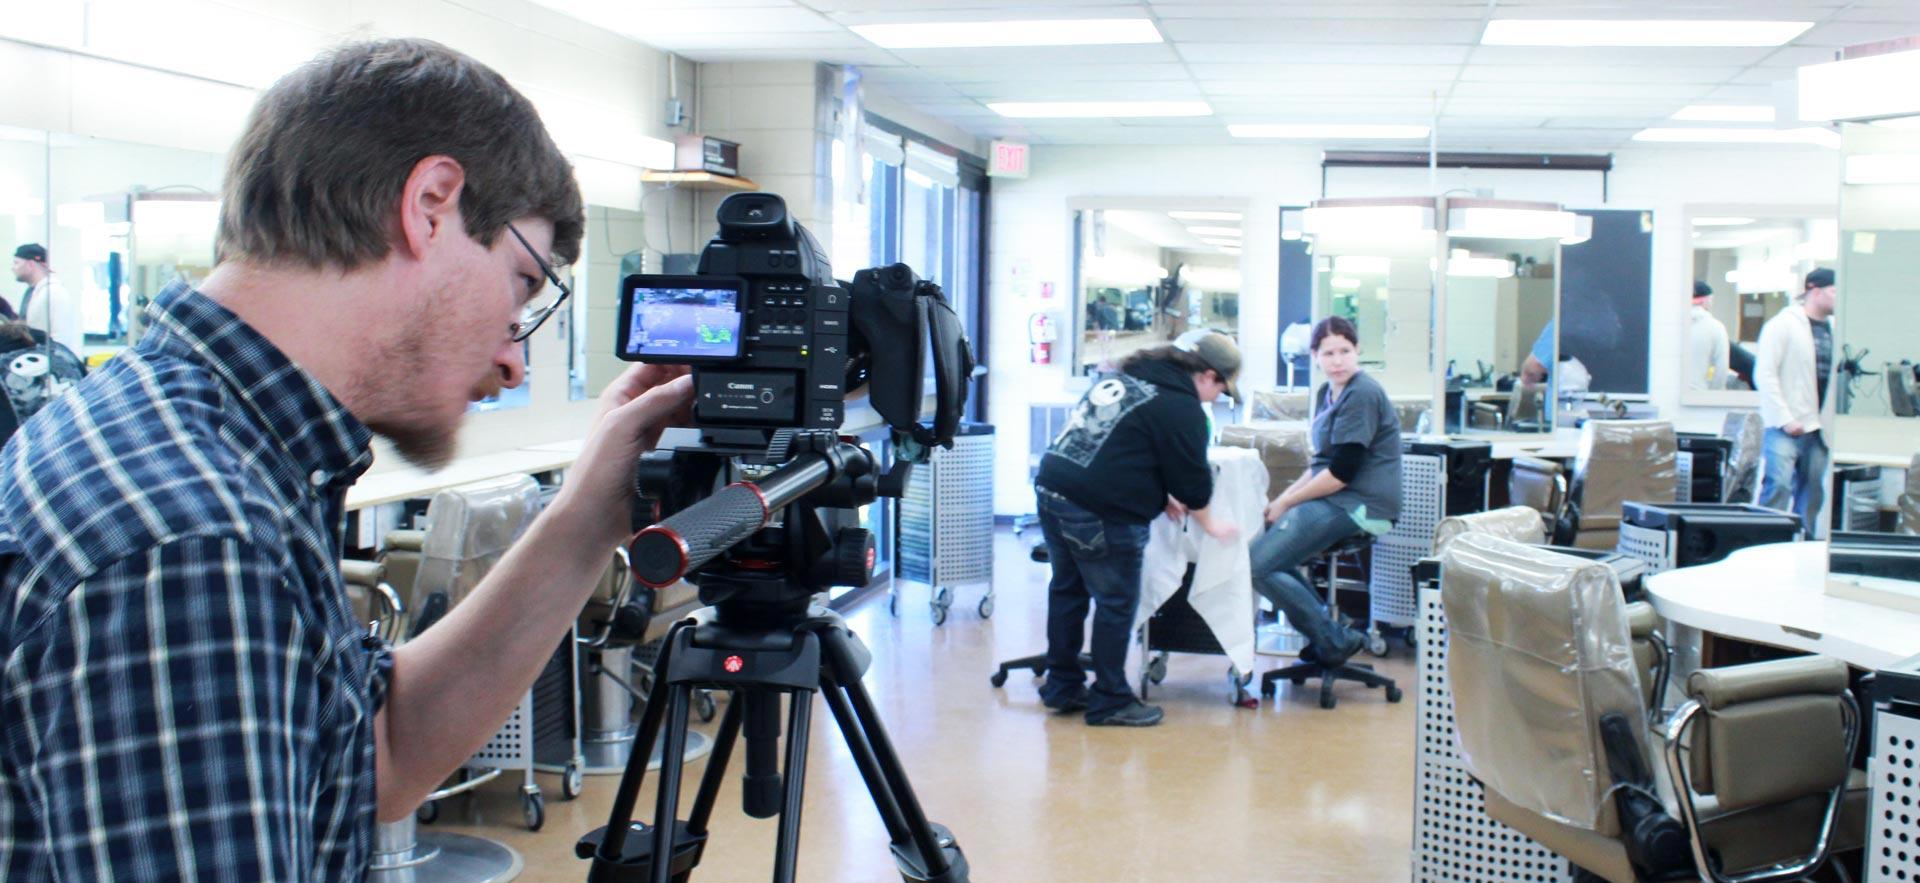 Male digital video student shoots video in the Sault College hairstyling salon.